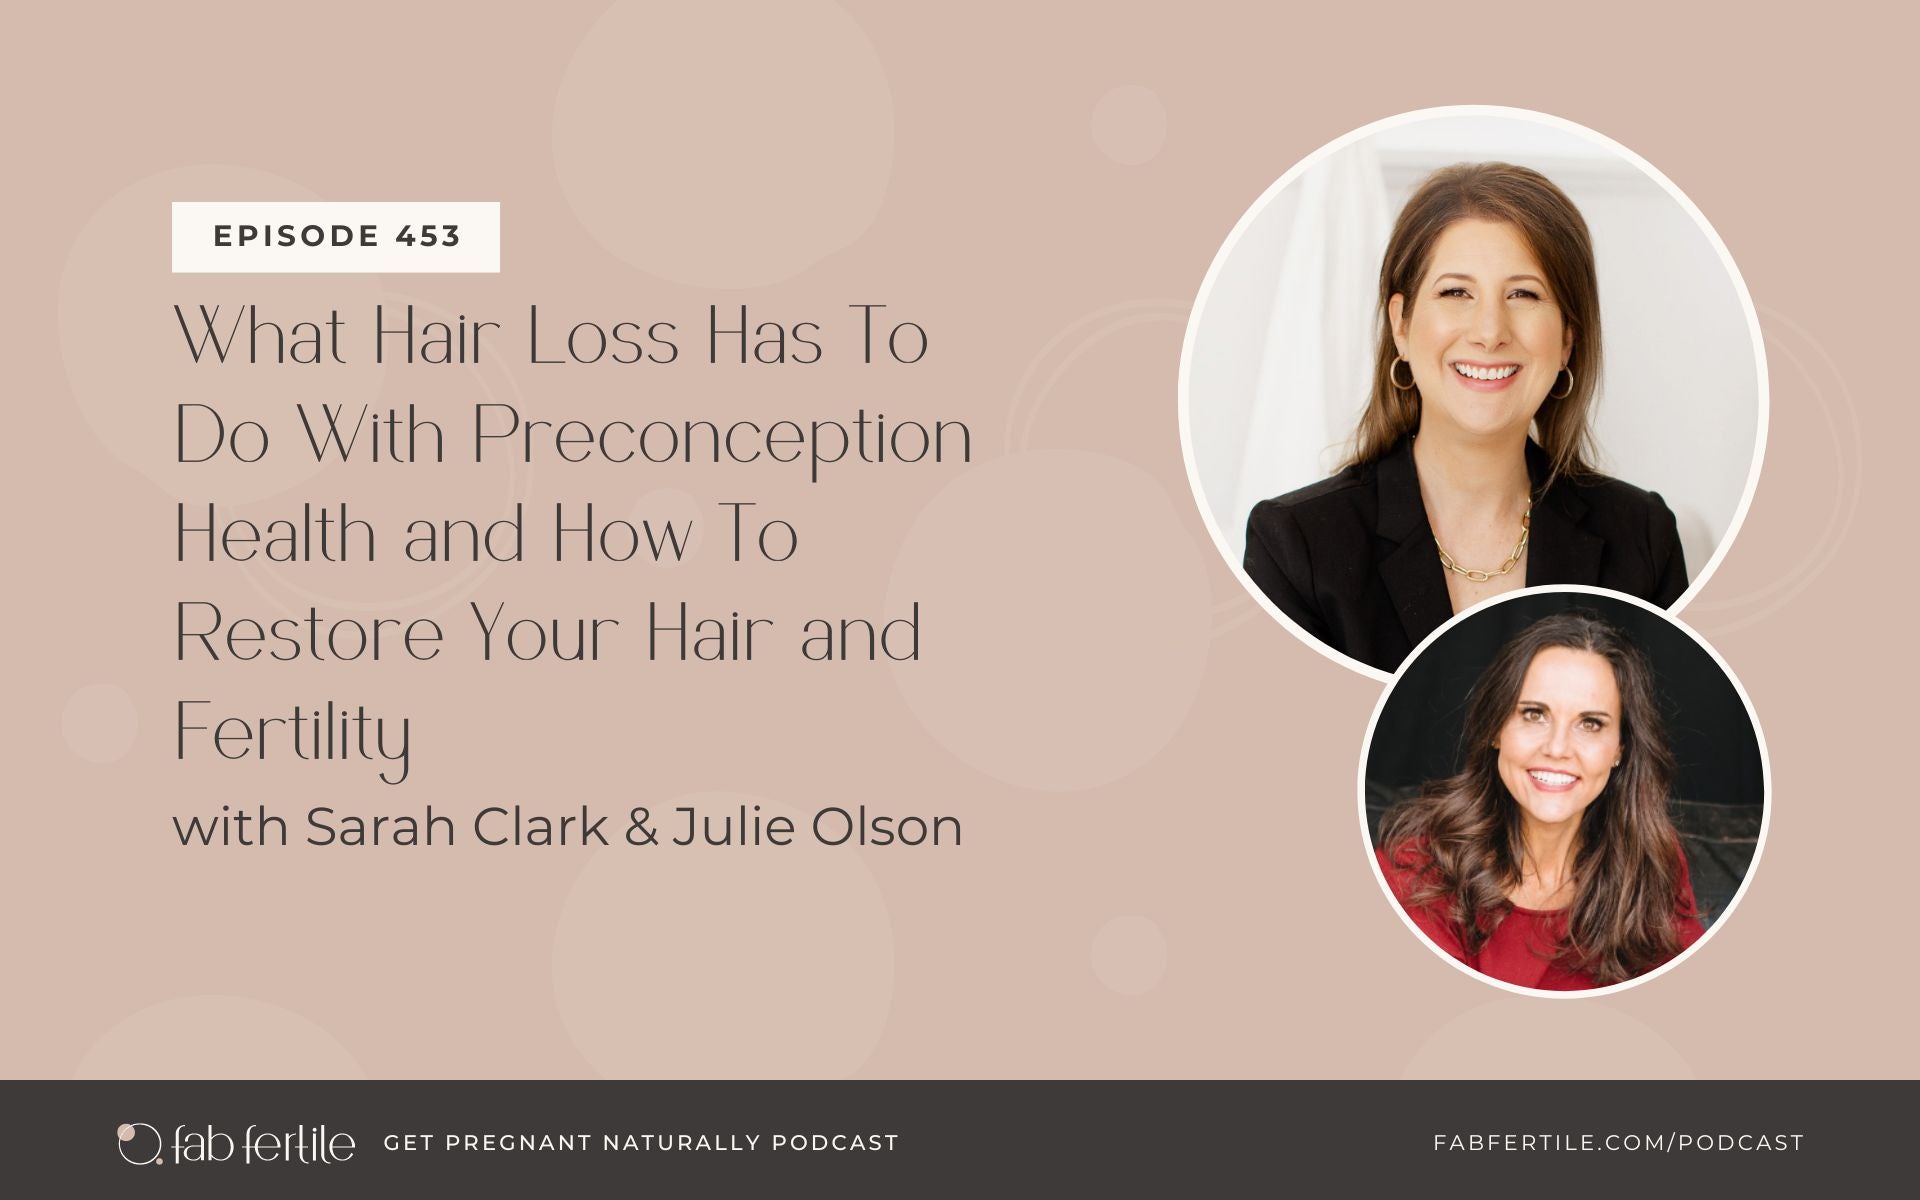 What Hair Loss Has To Do With Preconception Health and How To Restore Your Hair and Fertility with Julie Olson